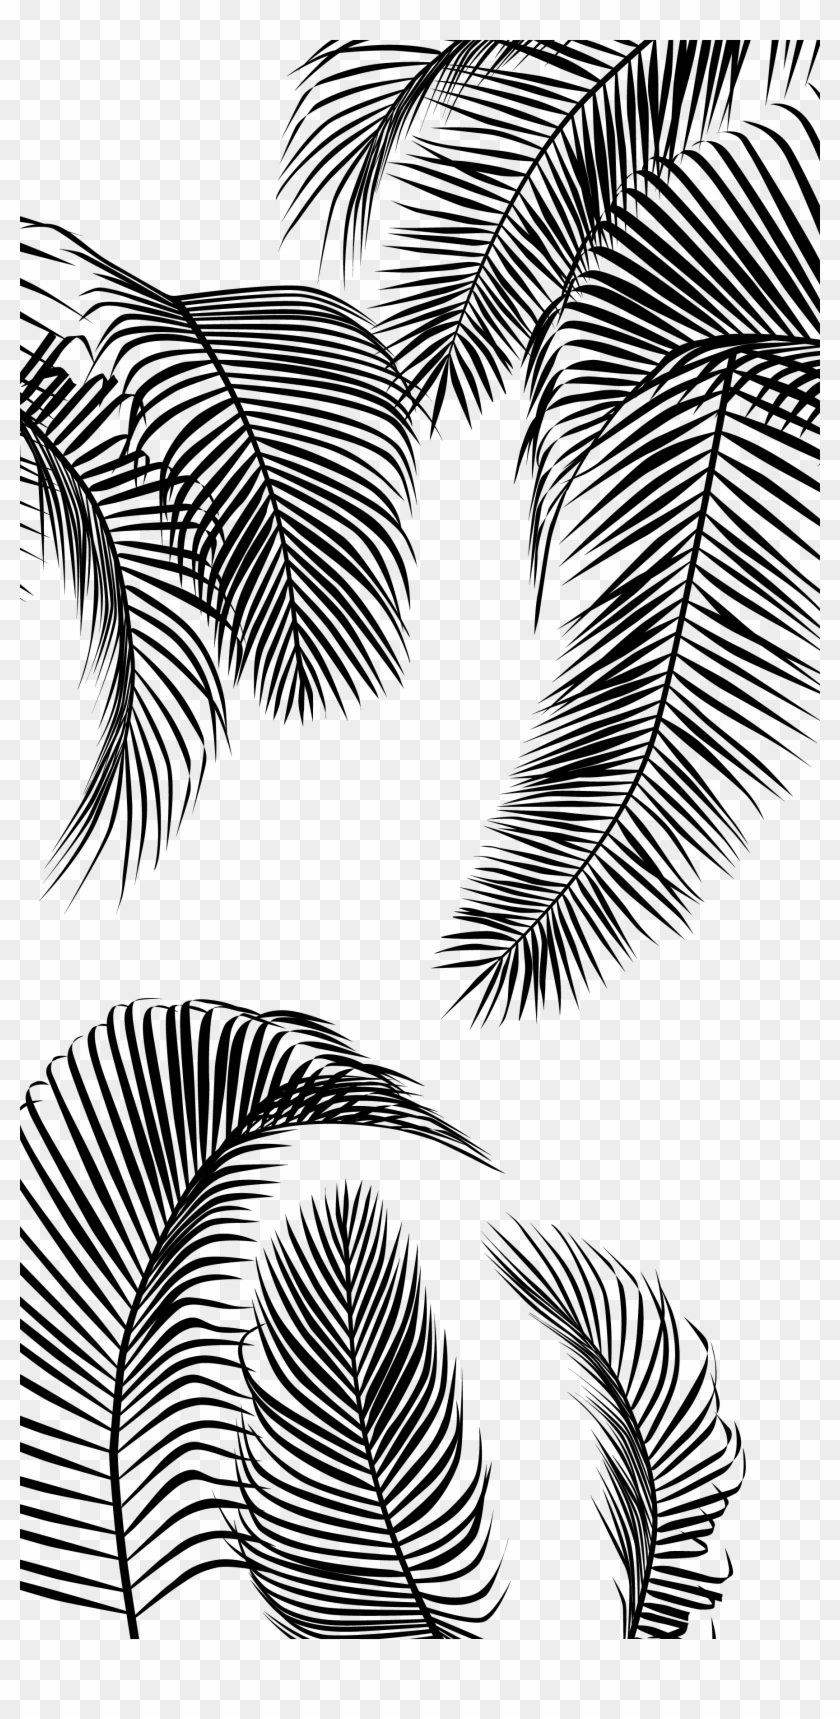 Palm Tree Leaves Palm Trees Hd Png Download 1772x3543 30317